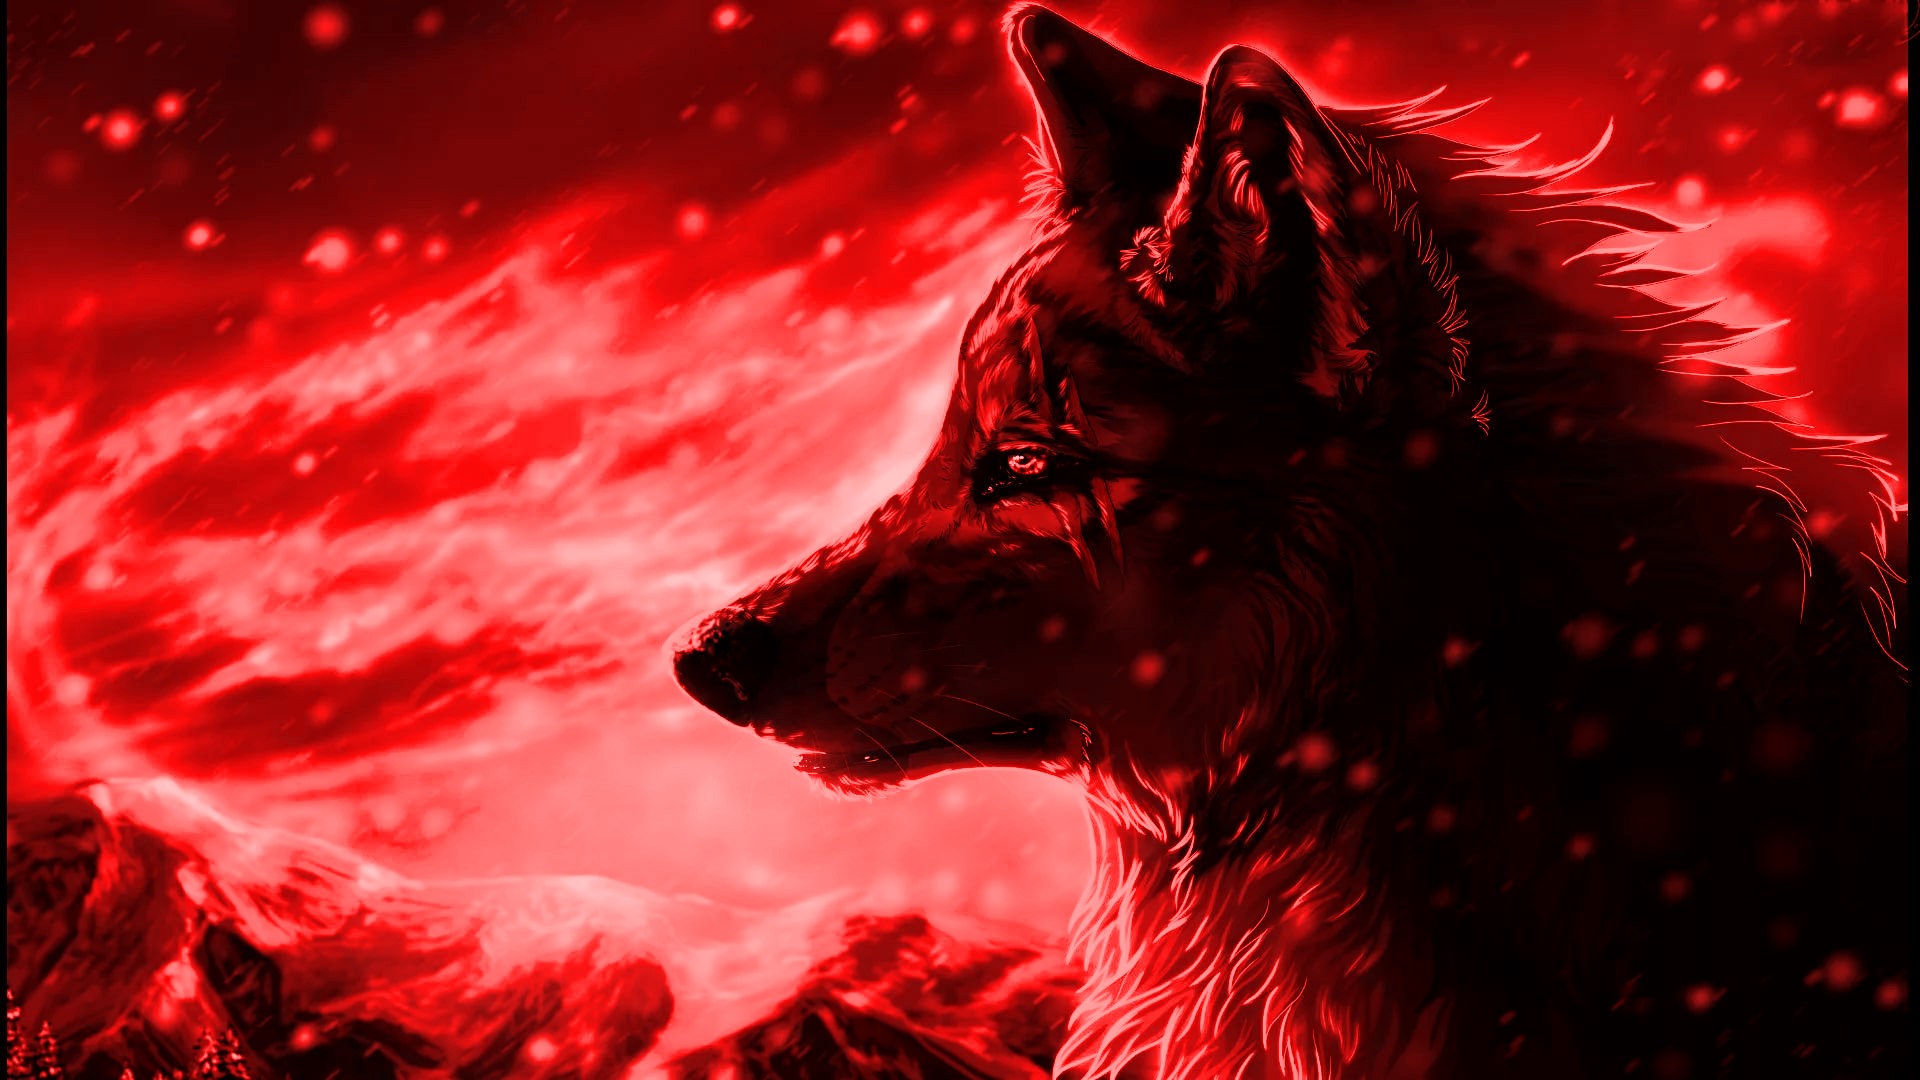 Wallpaper HD Cool Wolf With high-resolution 1920X1080 pixel. You can use this wallpaper for your Desktop Computer Backgrounds, Mac Wallpapers, Android Lock screen or iPhone Screensavers and another smartphone device